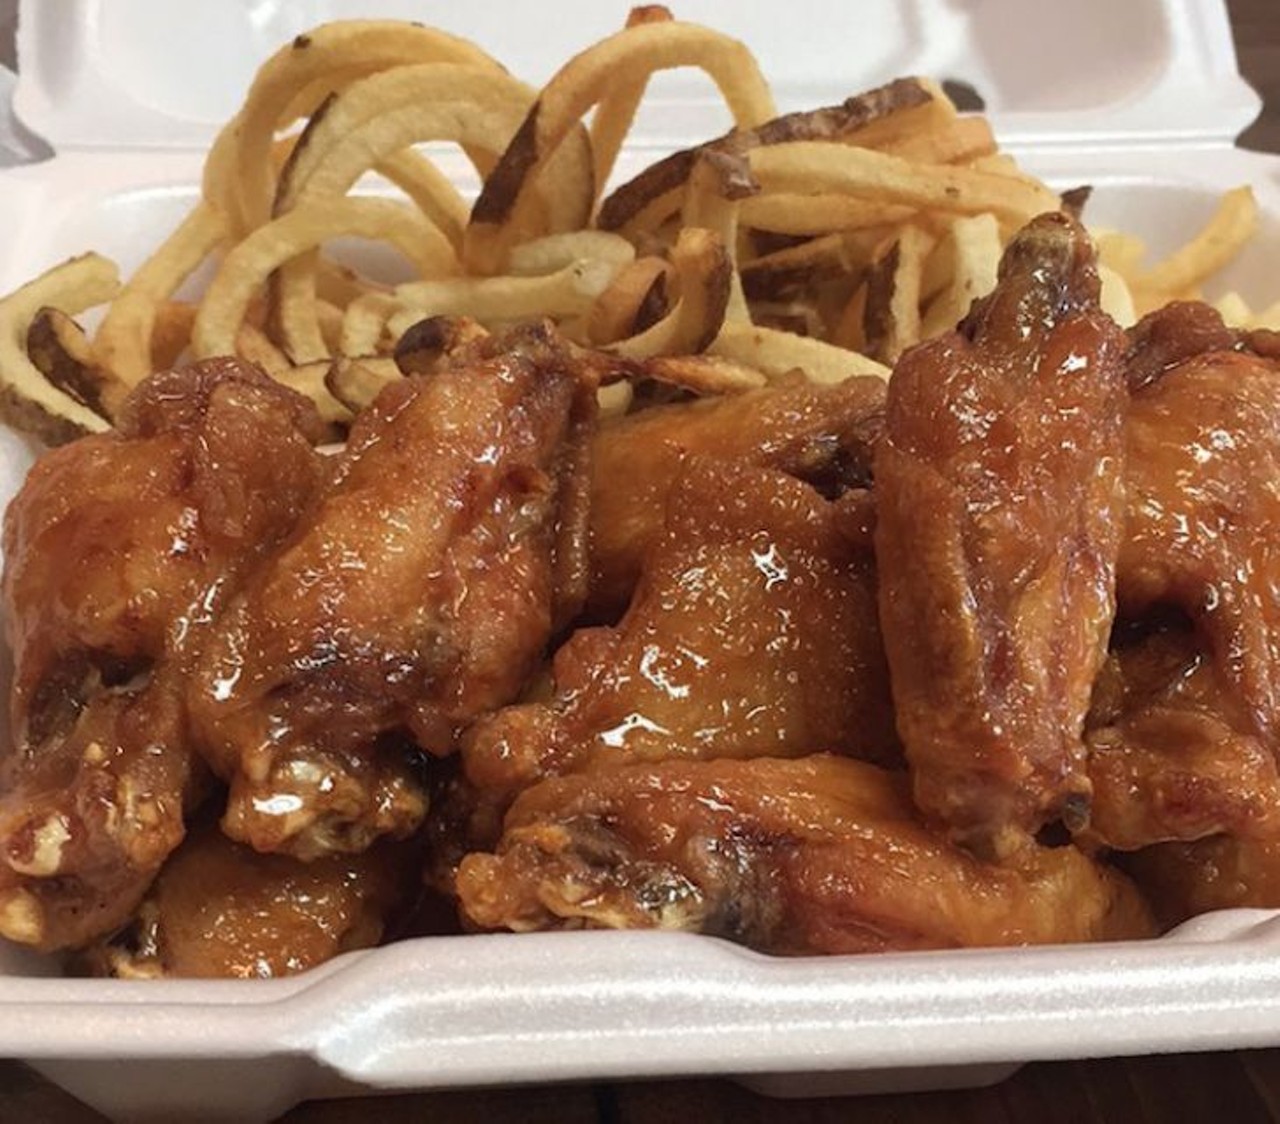 Wings of Winter Garden
12801 W. Colonial Drive, Winter Garden, 407-656-4492 
Their all-day specials offer 6-12 wings with curly fries and a drink ranging from $6-$10 every day, a 36-wing family pack for $31.99, and a hot honey garlic sauce that can&#146;t be replicated.
Photo via fat_boy_sobbie/Instagram